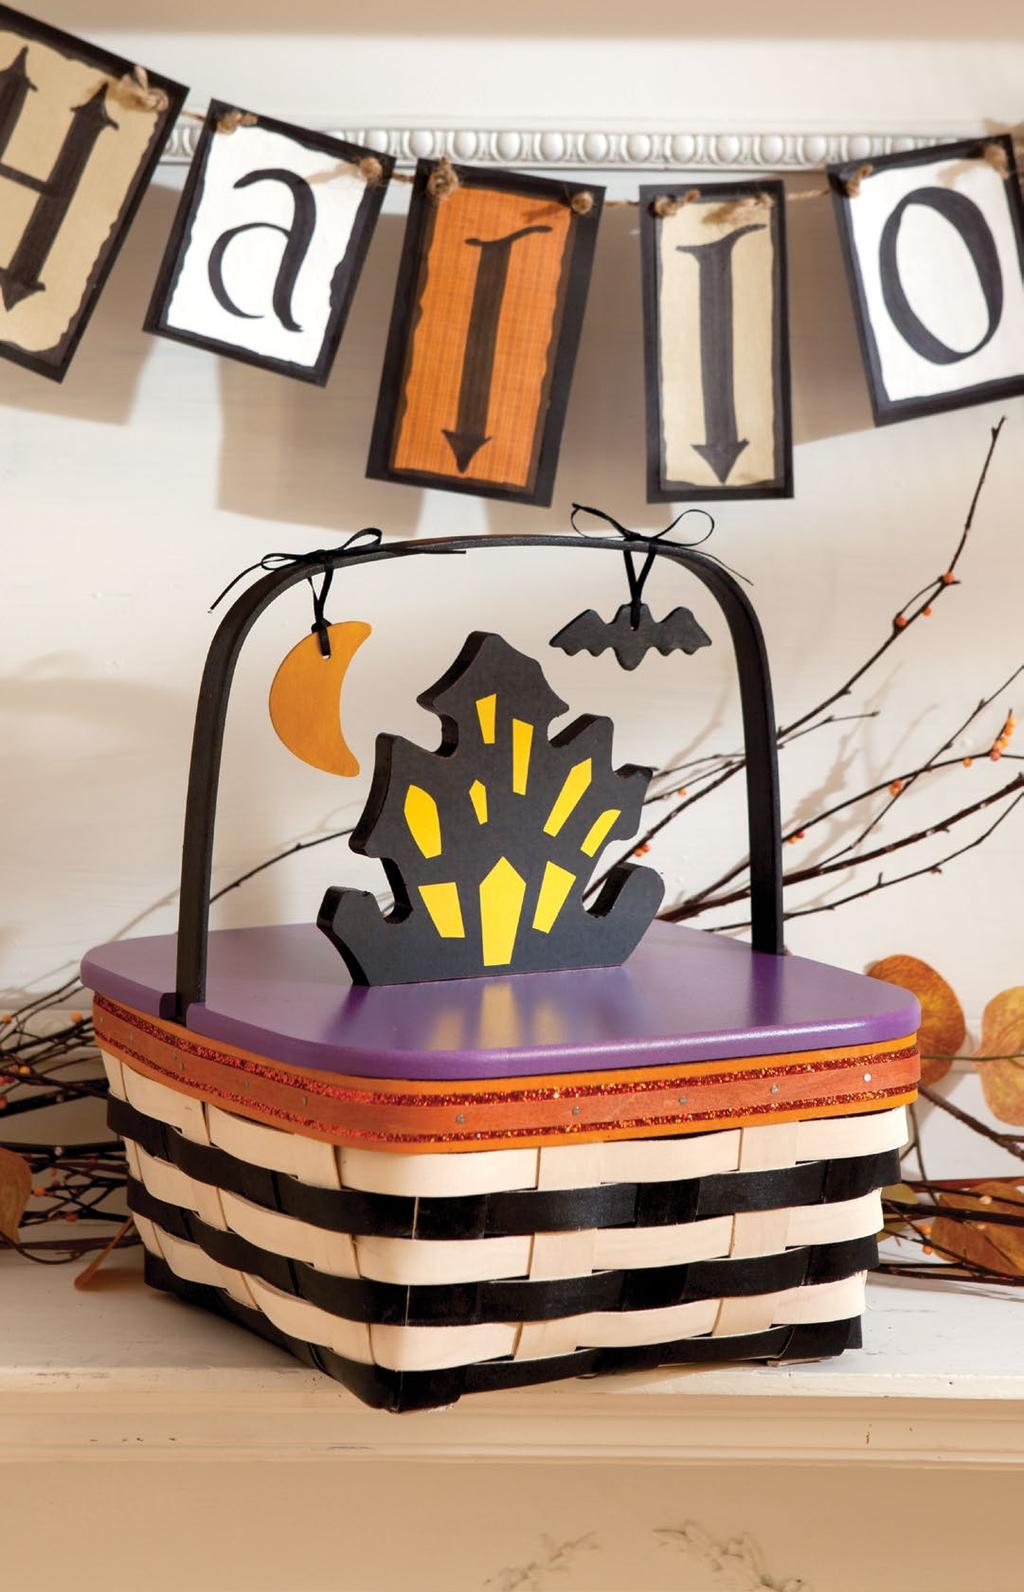 A b Bonus Buy! Yellow Purple C Orange Scaredy Fun! Scare up a good time with baskets that put the fun into functional!